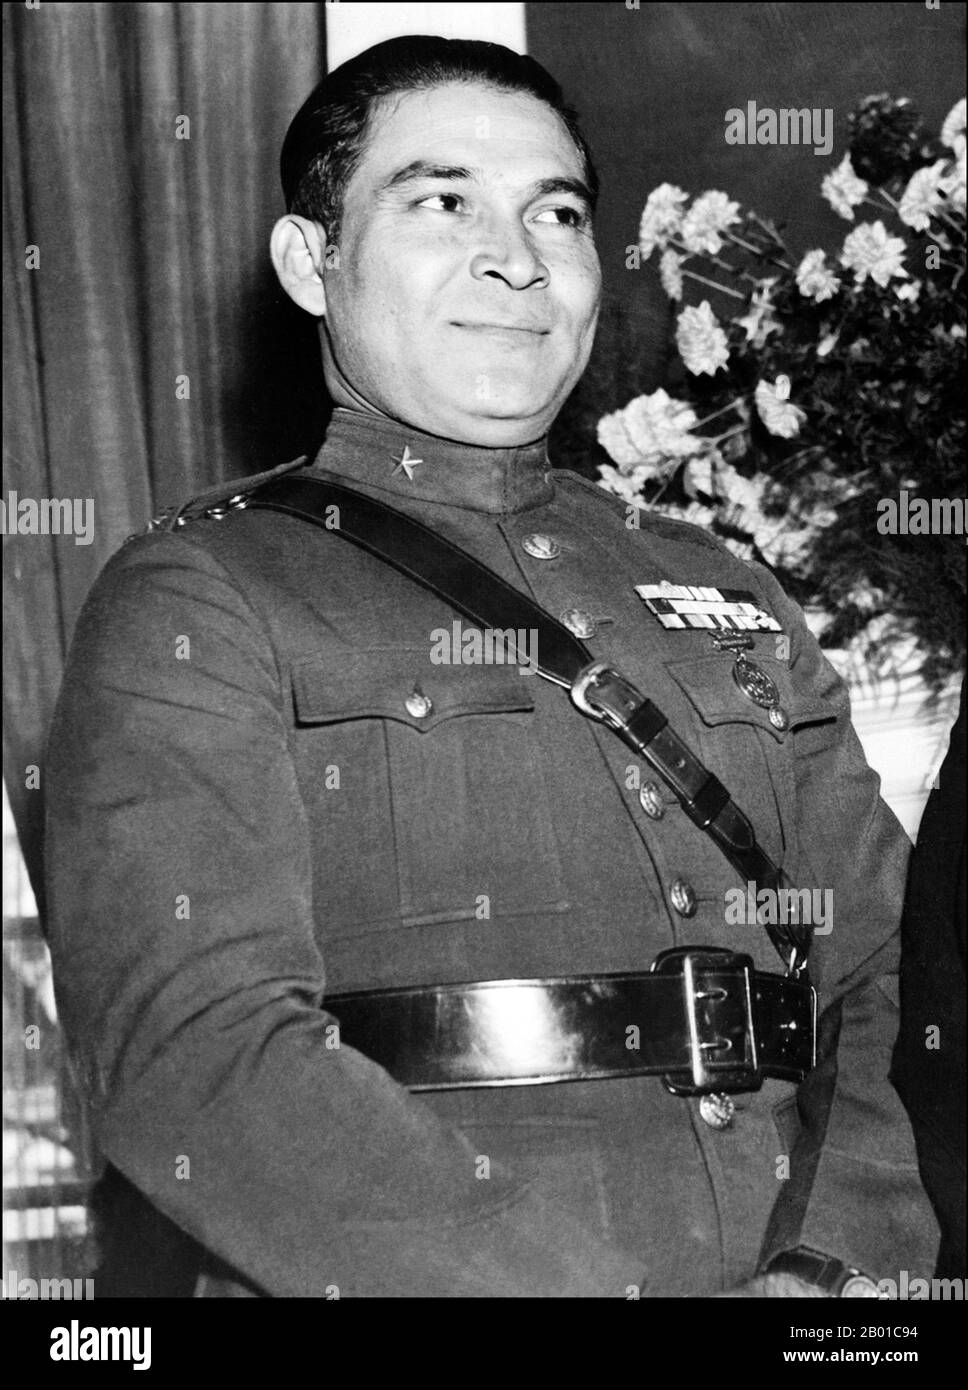 Cuba: The Cuban dictator Fulgencio Batista (16 January 1901 - 6 August 1973), Havana, March 1952.  Fulgencio Batista y Zaldívar was a Cuban President, dictator and military leader closely aligned with and supported by the United States. He served as the leader of Cuba from 1933 to 1944 and from 1952 to 1959, before being overthrown as a result of the Cuban Revolution. Stock Photo